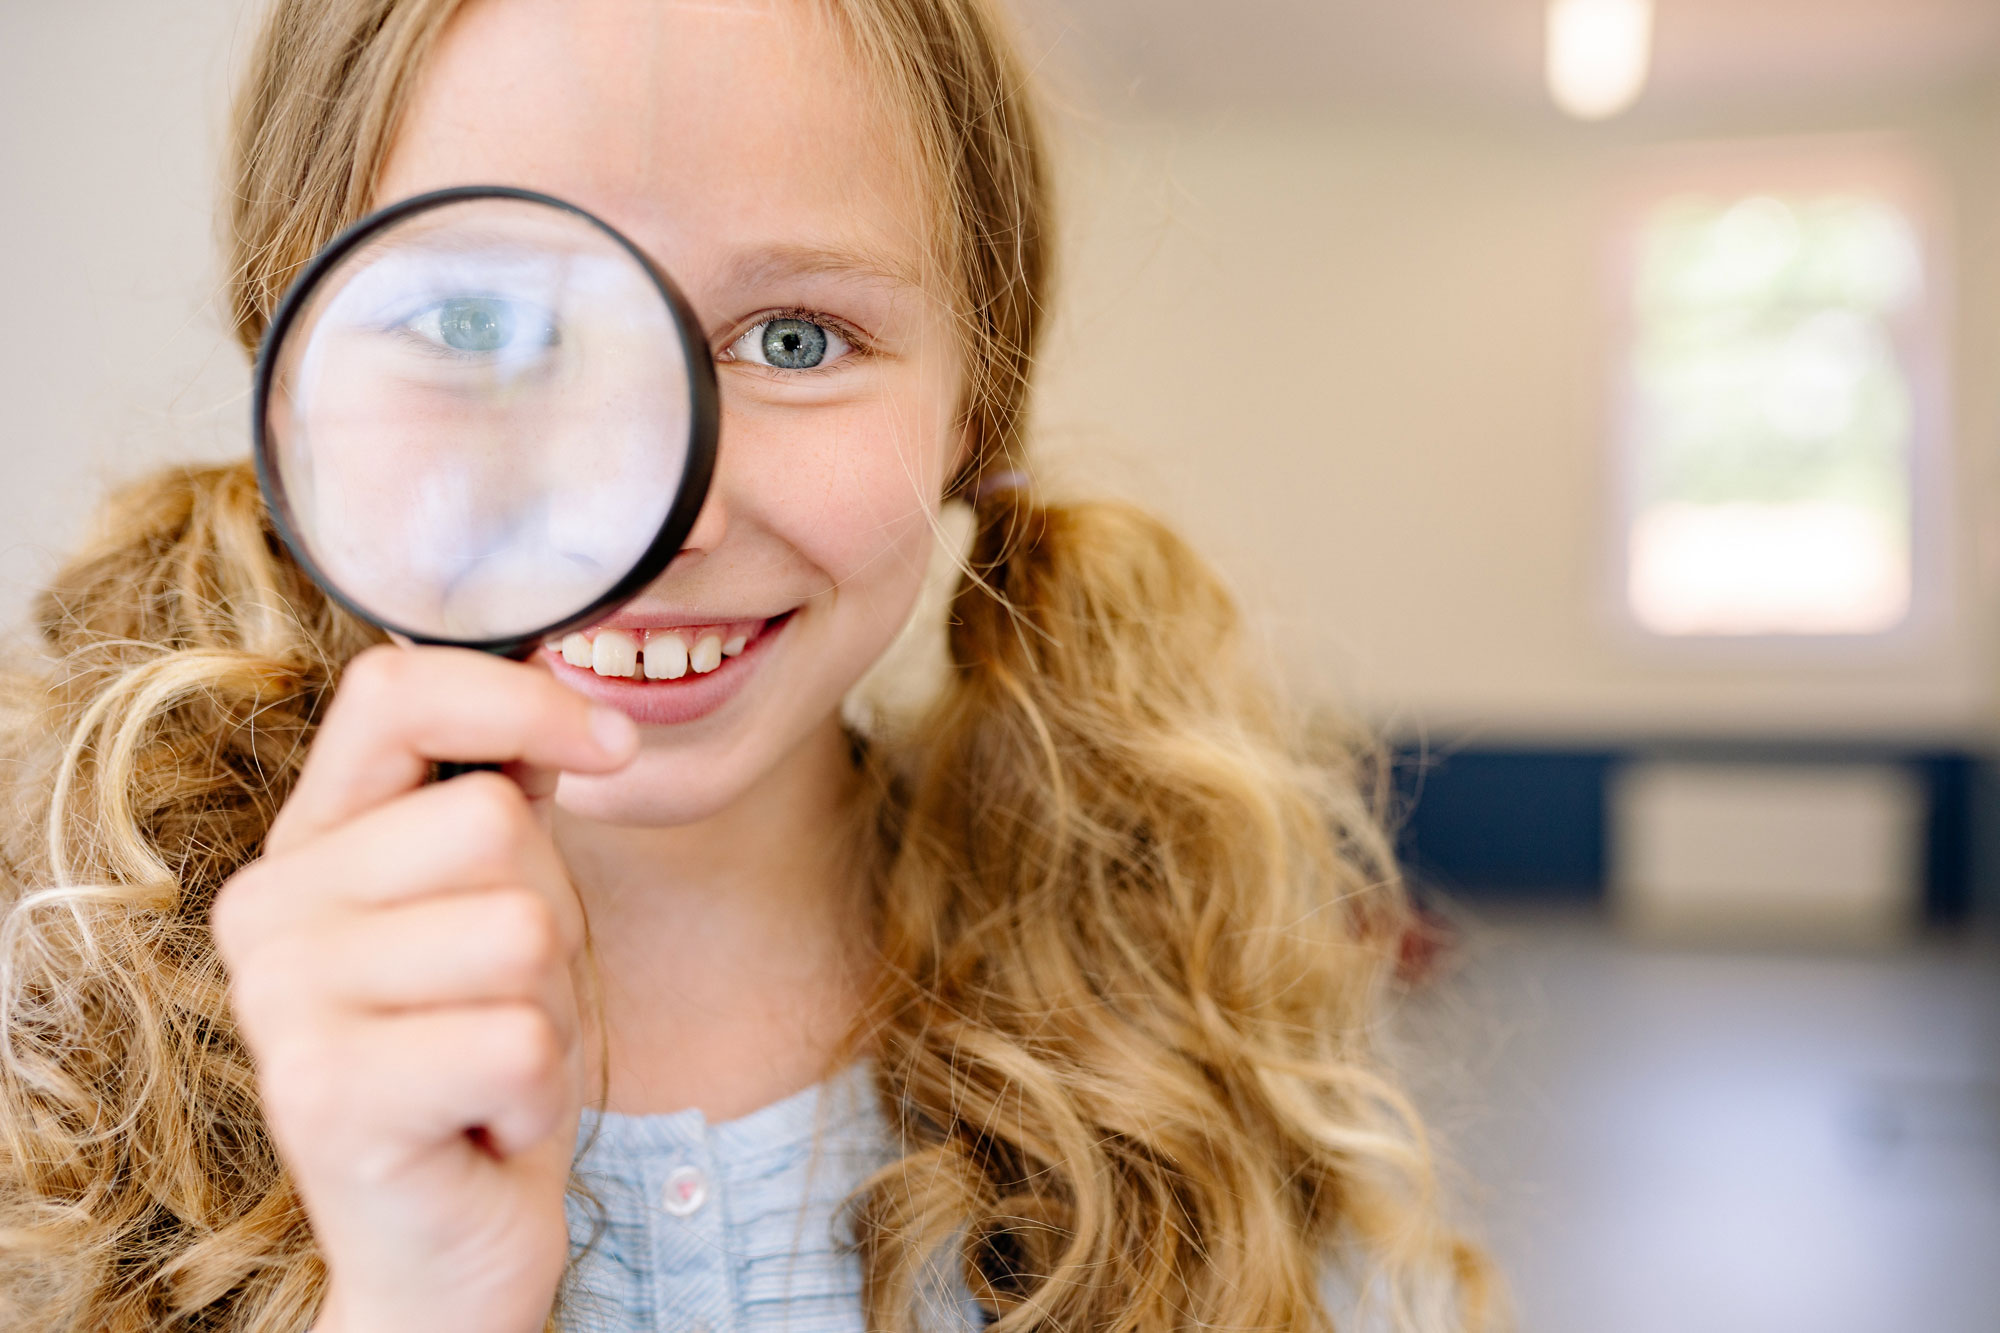 Stock photo of a girl holding a magnifying glass up to her eye.